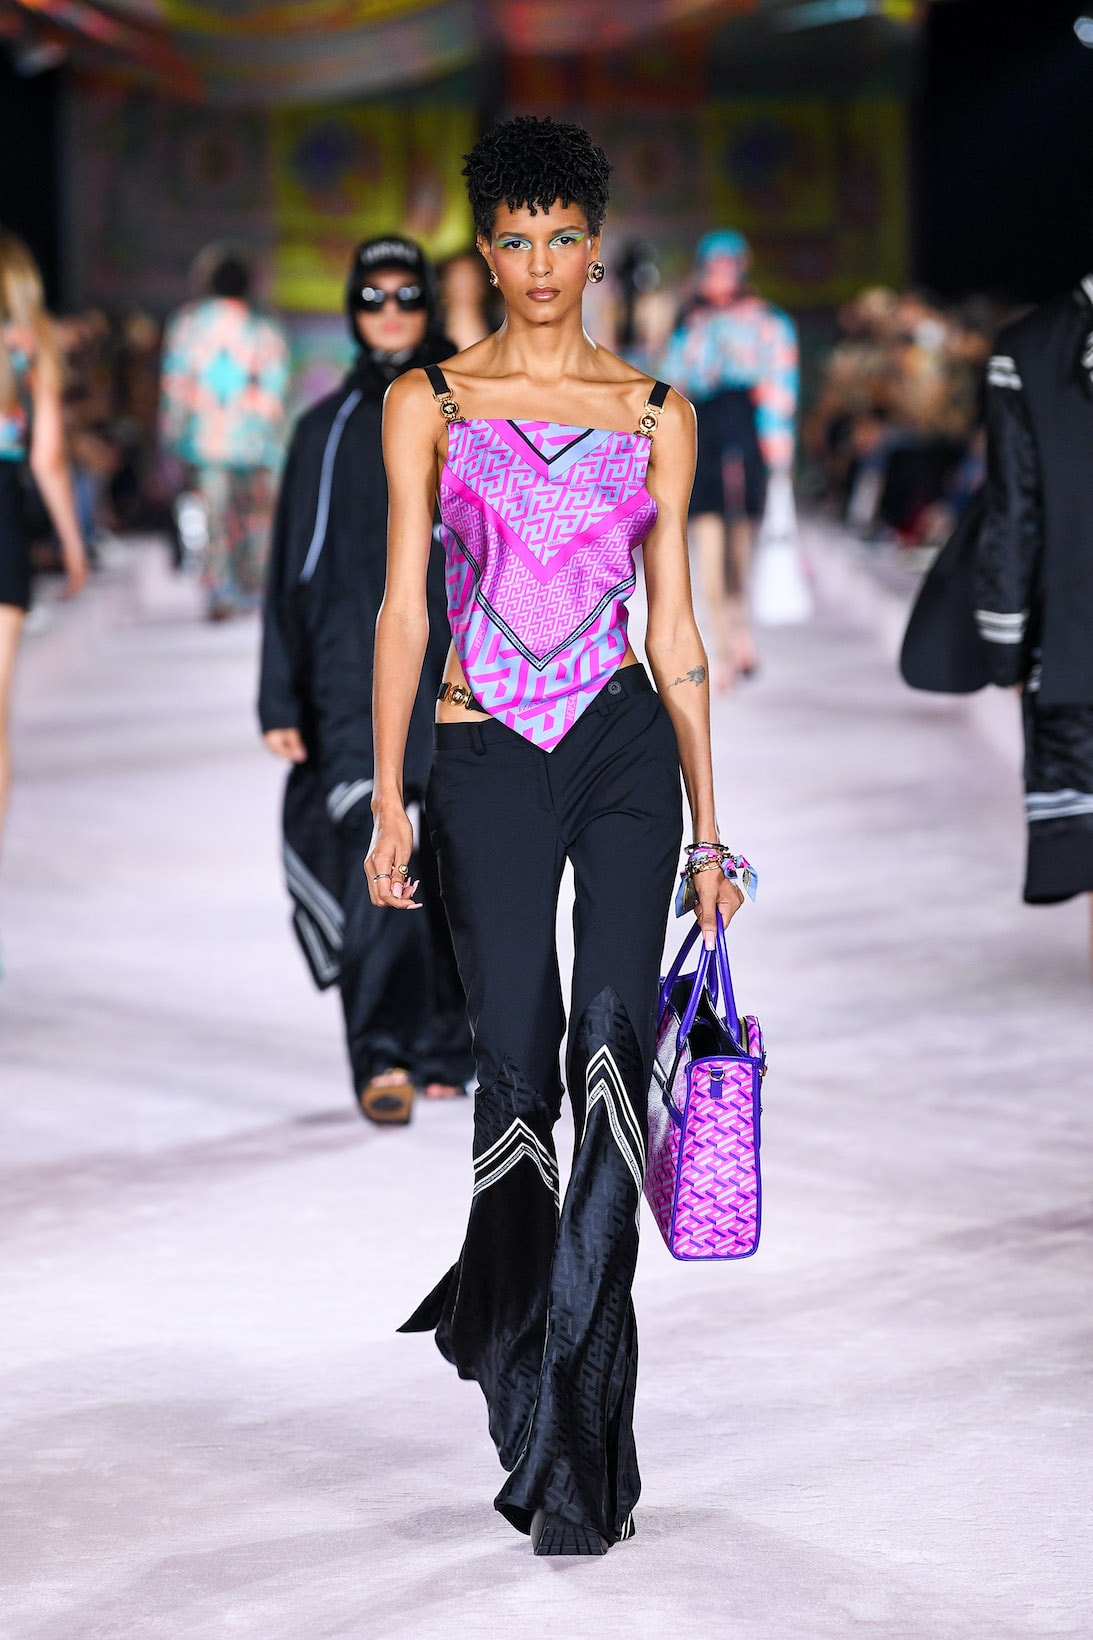 Milan Fashion Week SS18: The Versace Tribute collection (featuring